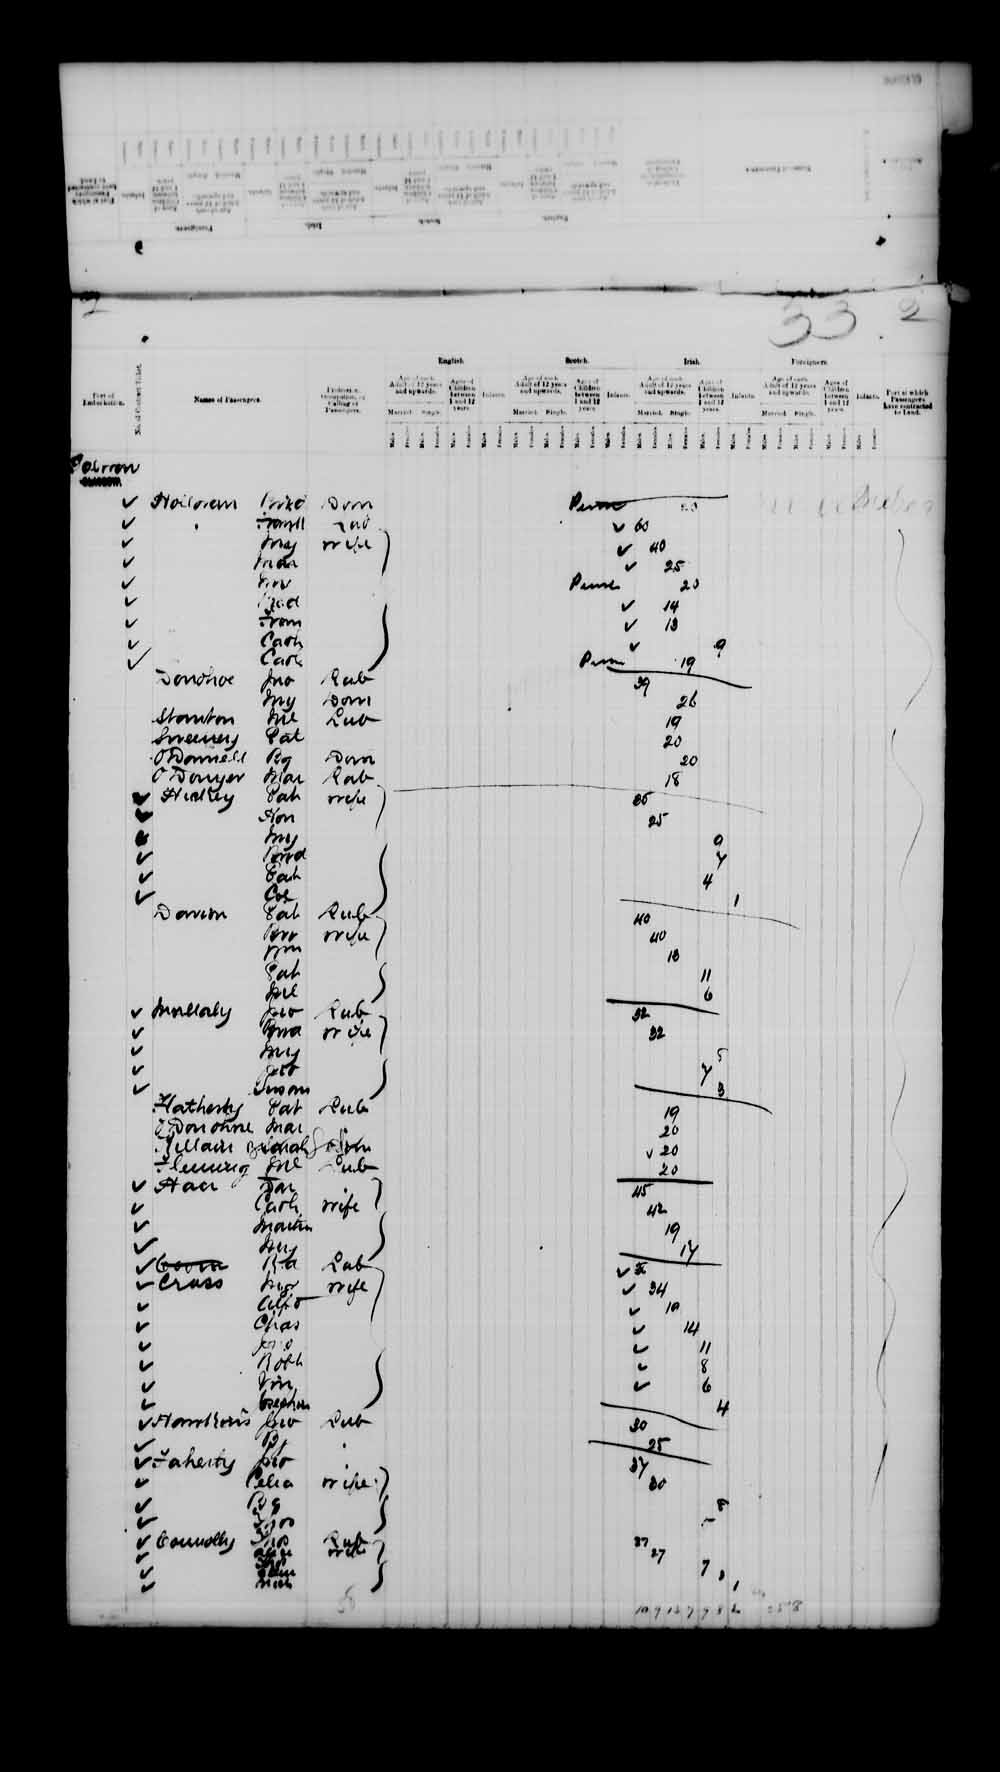 Digitized page of Passenger Lists for Image No.: e003543101